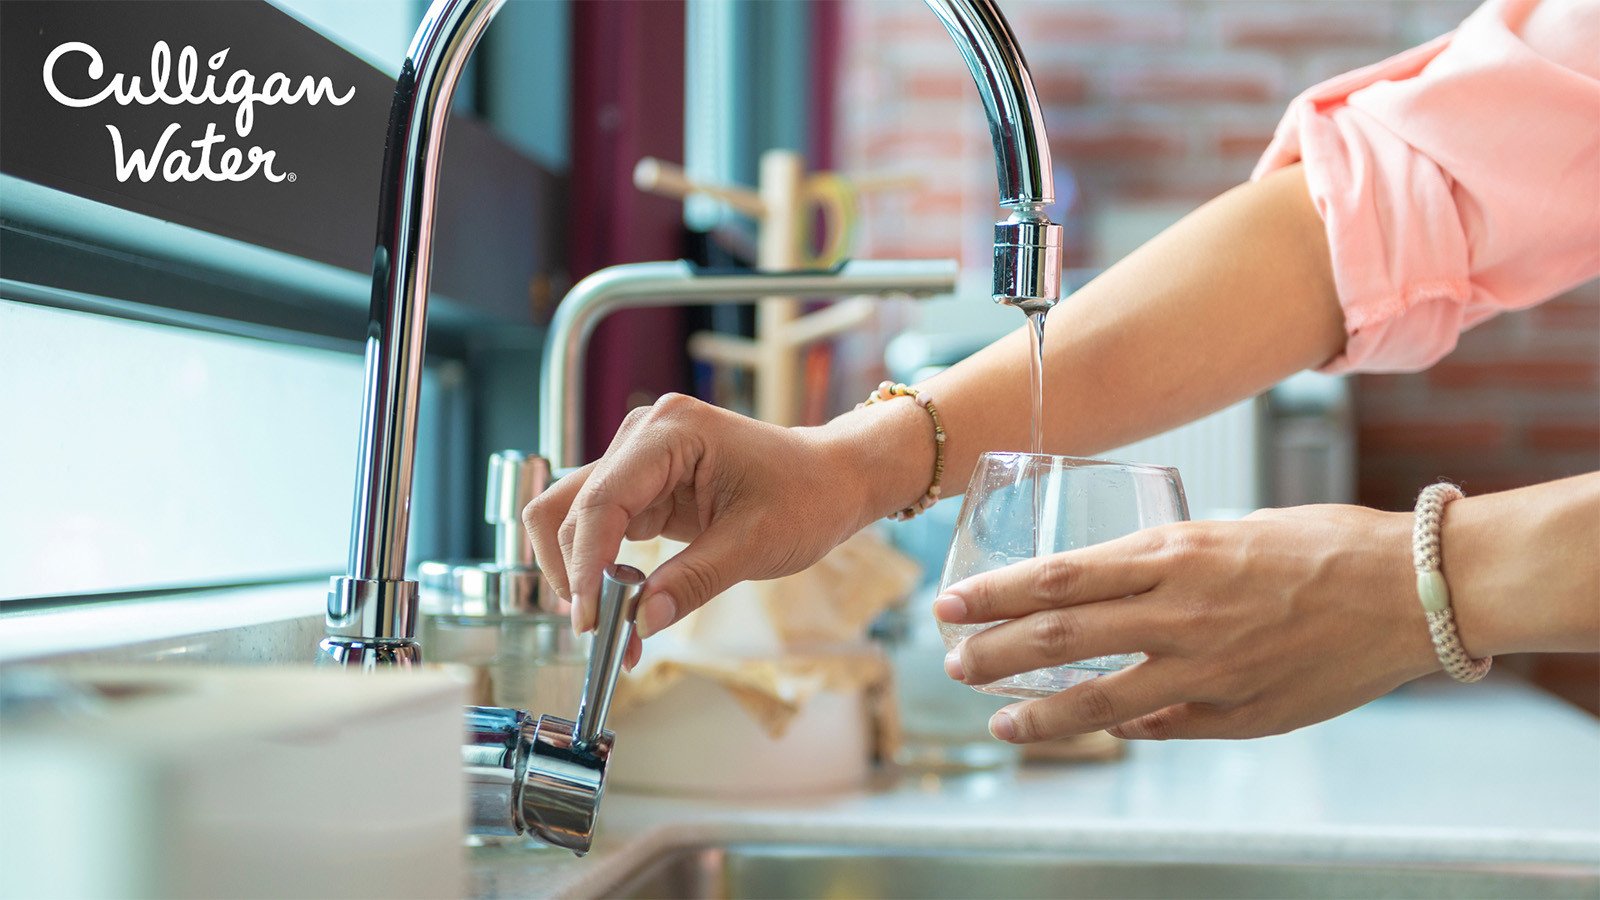 Person filling glass with water at faucet